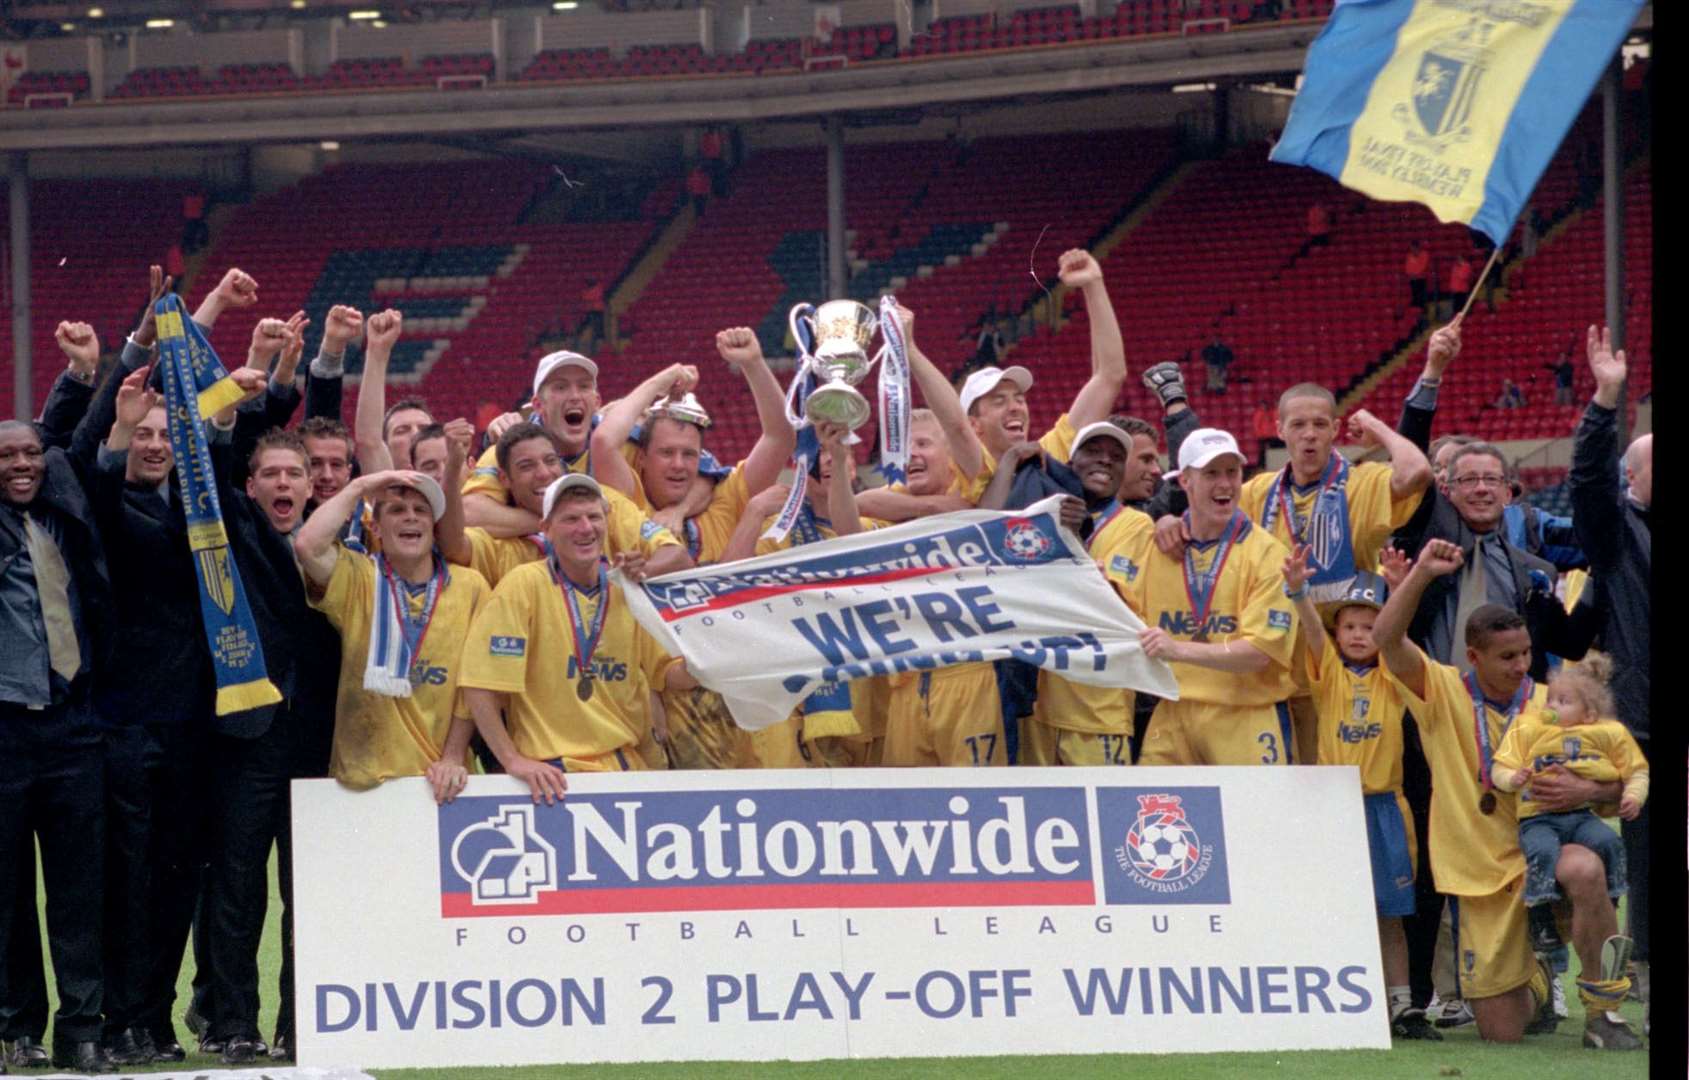 Gillingham celebrate after beating Wigan in the Division 2 play-off final at Wembley on 28 May, 2000